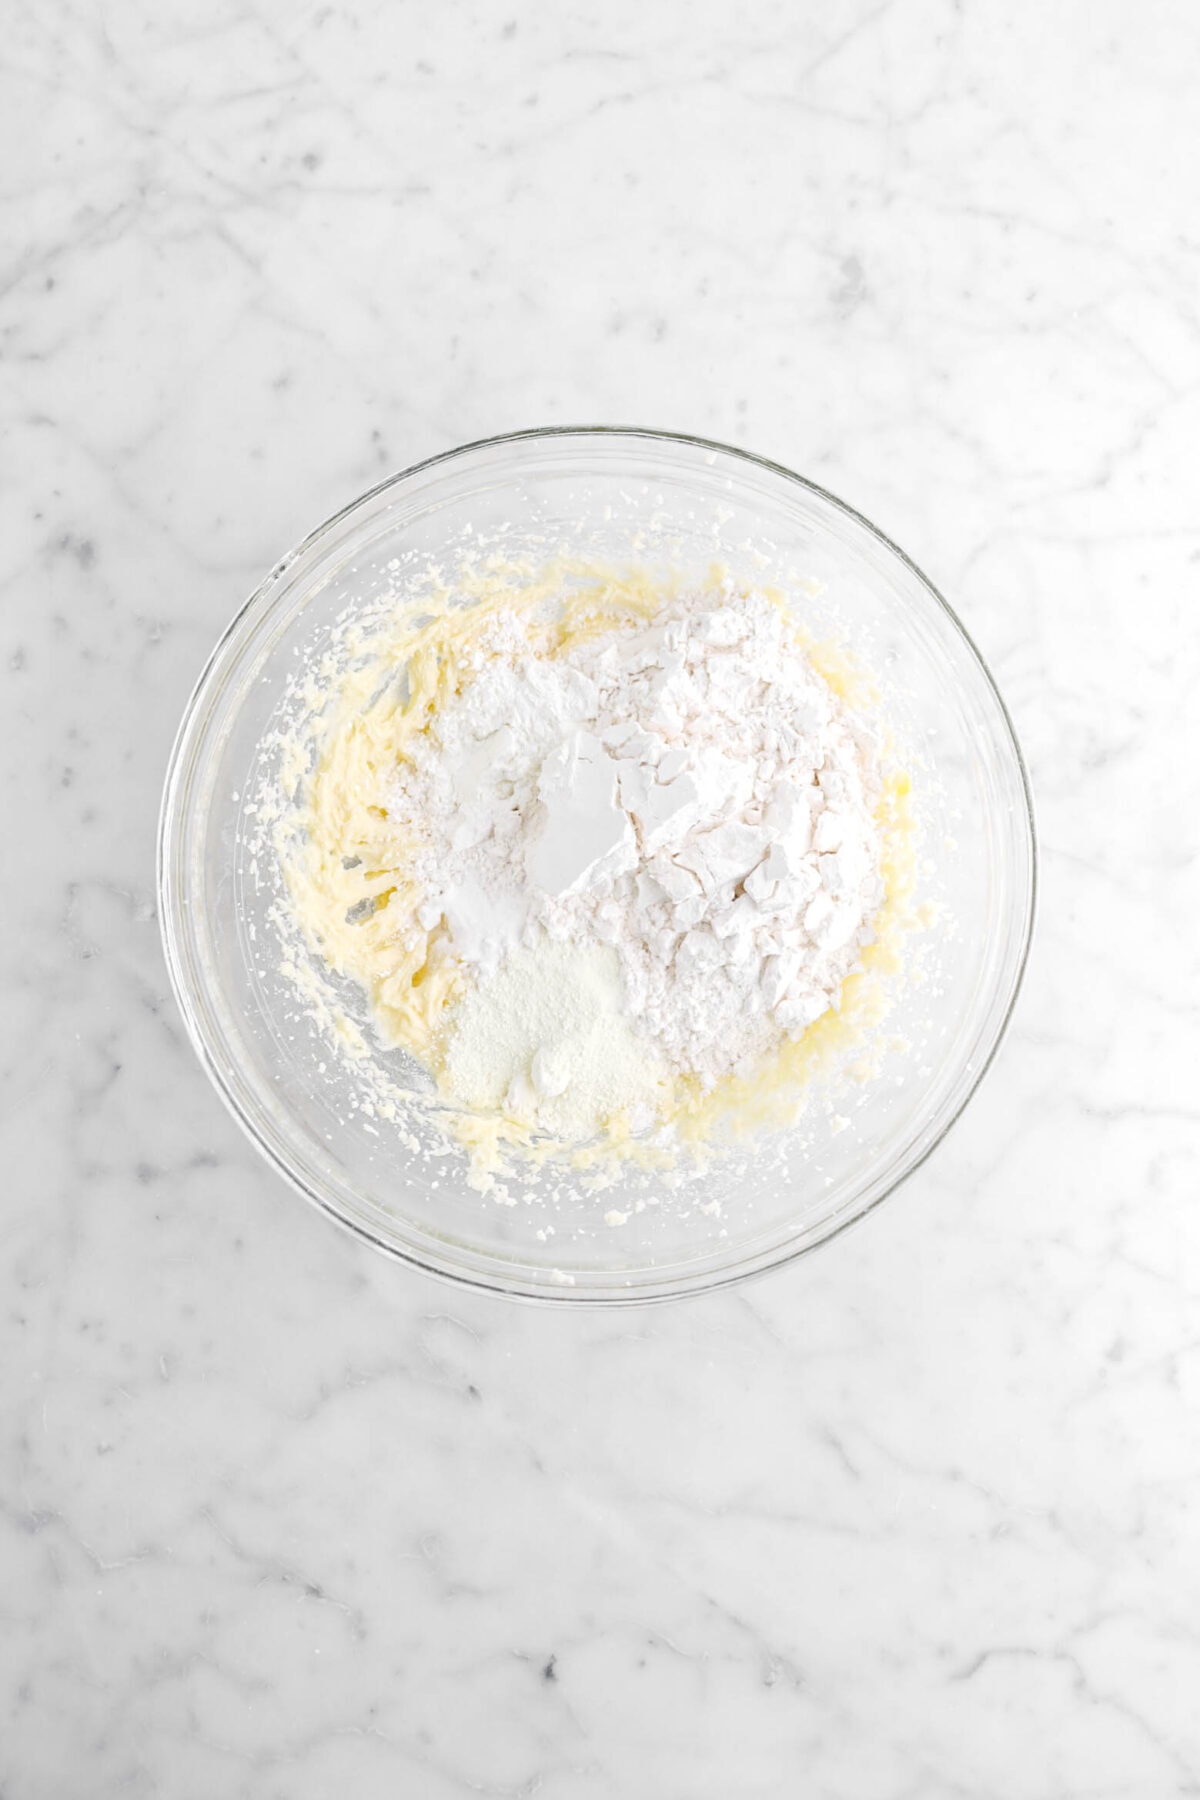 flour, powdered milk, corn starch, and baking soda added to butter mixture.